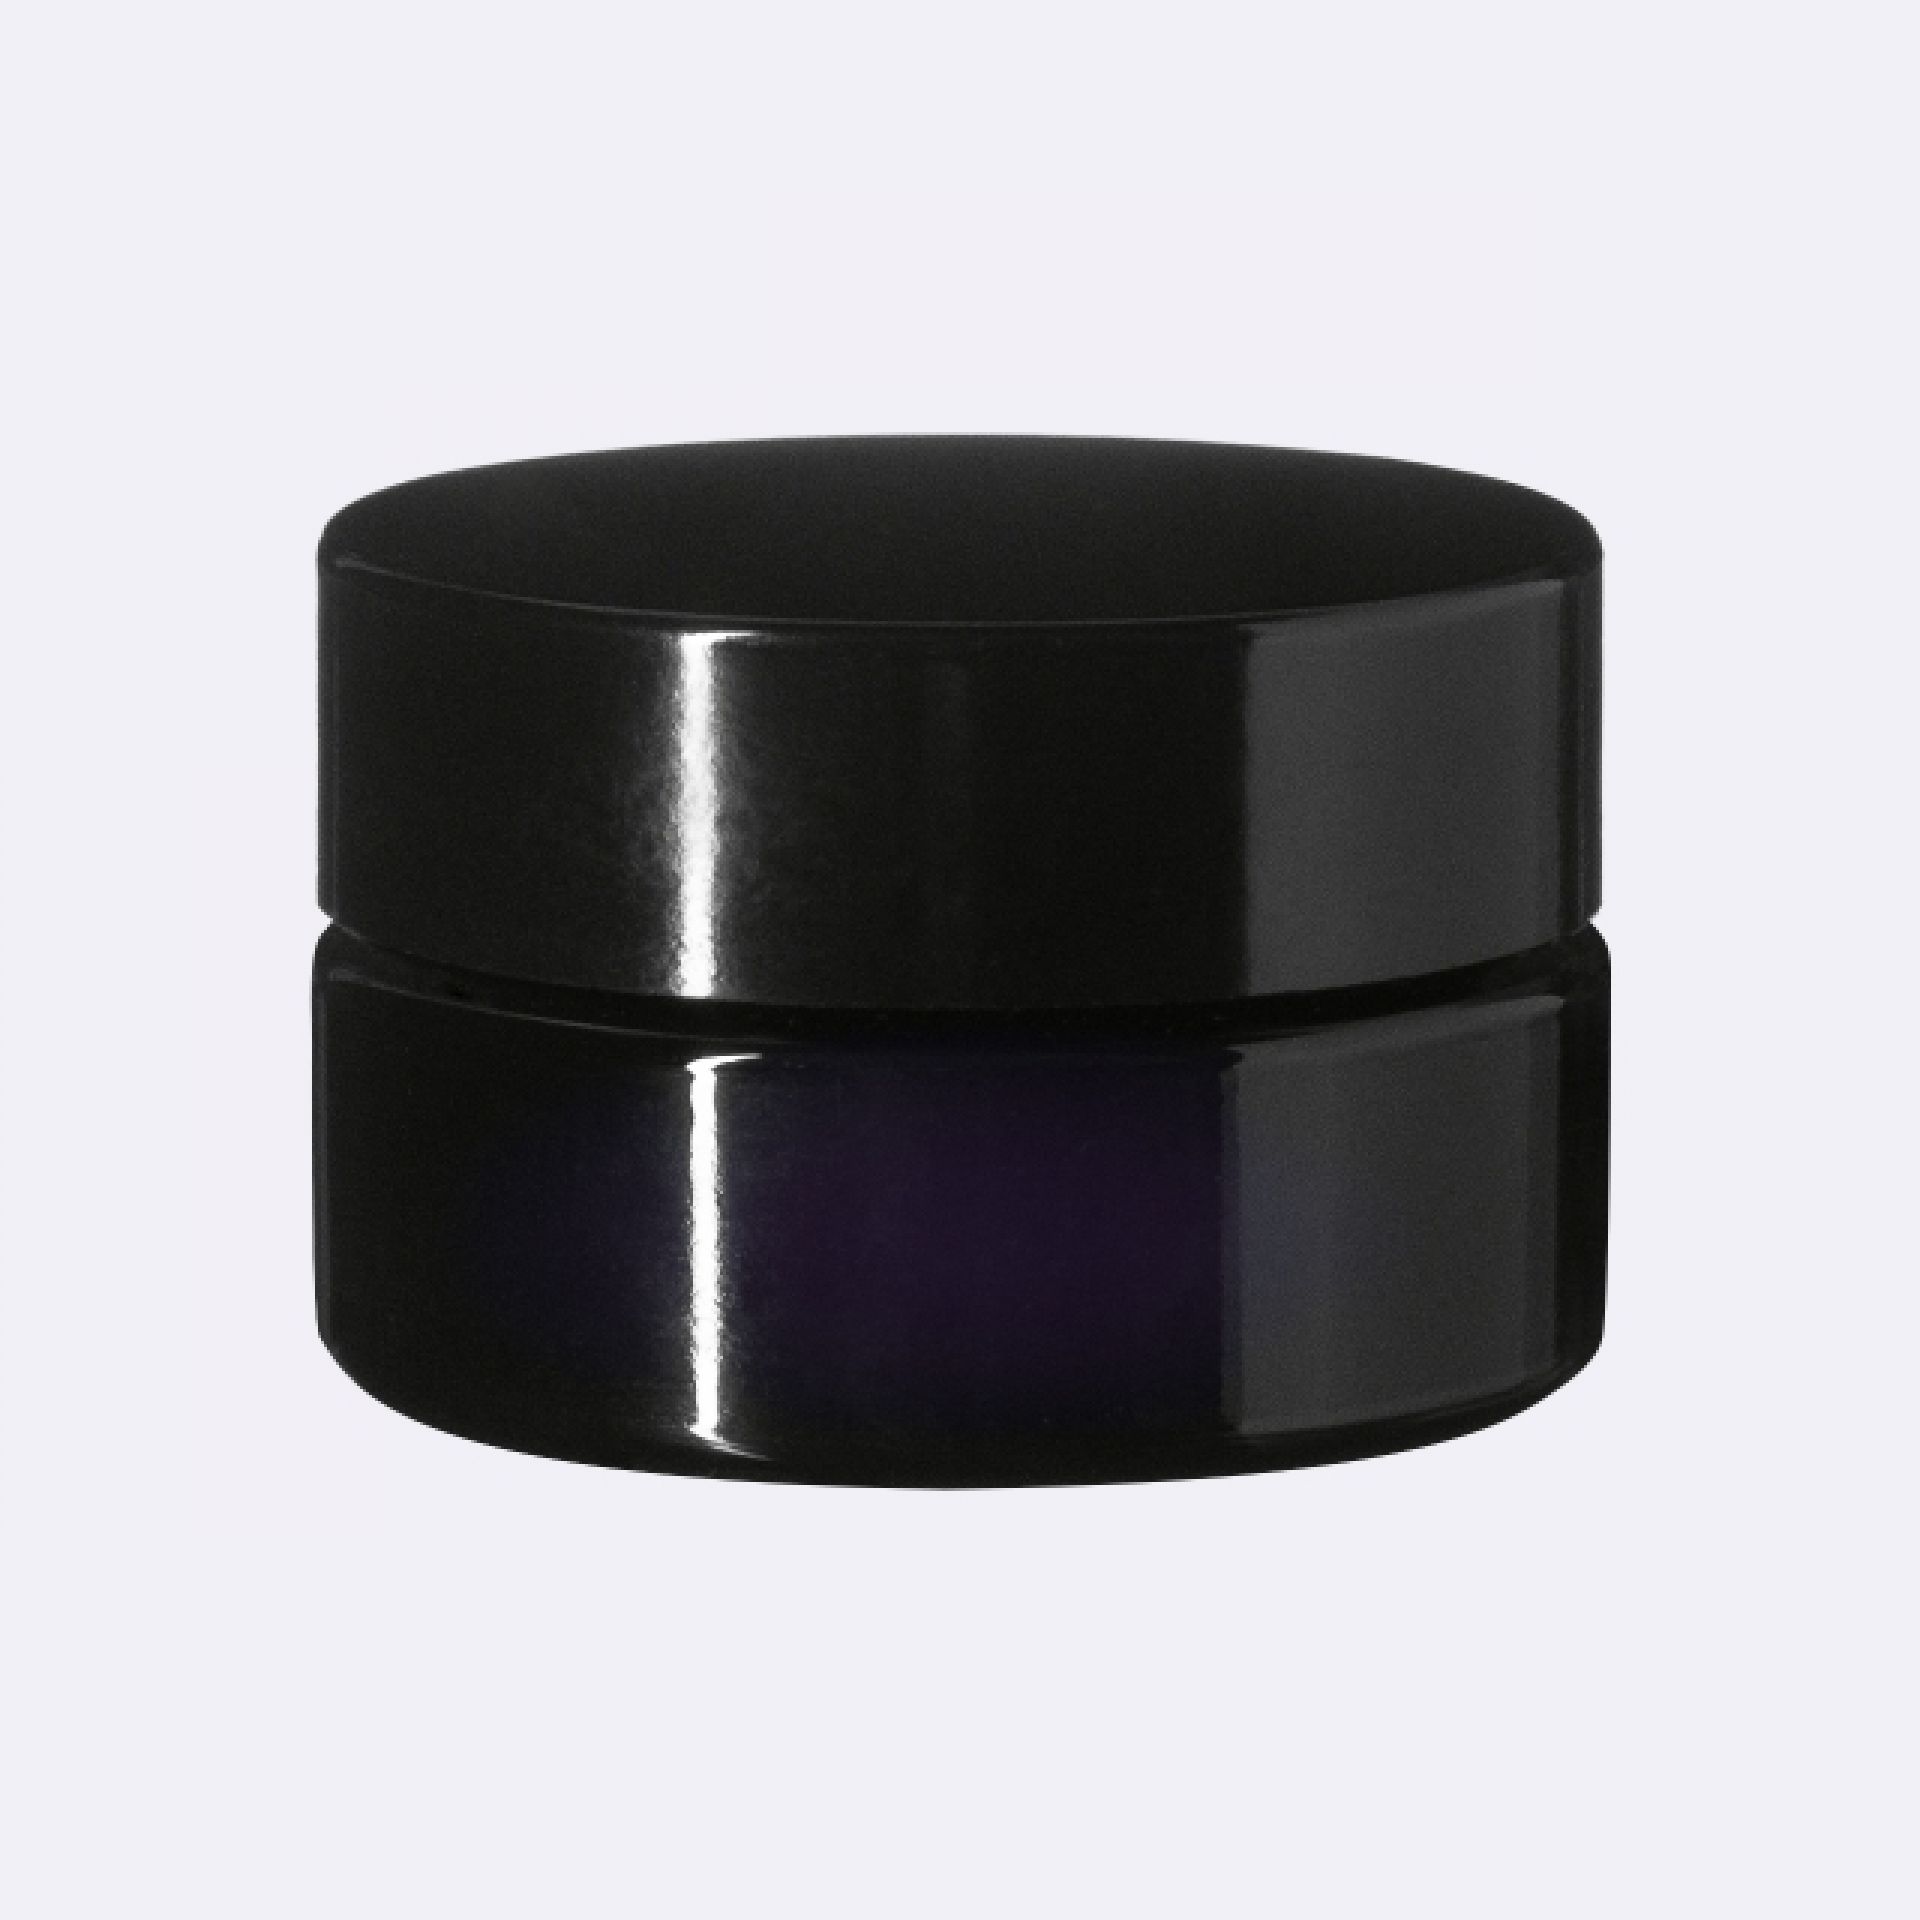 Lid Modern 39 special, PP, black, glossy finish, violet Phan inlay (Sirius 15)